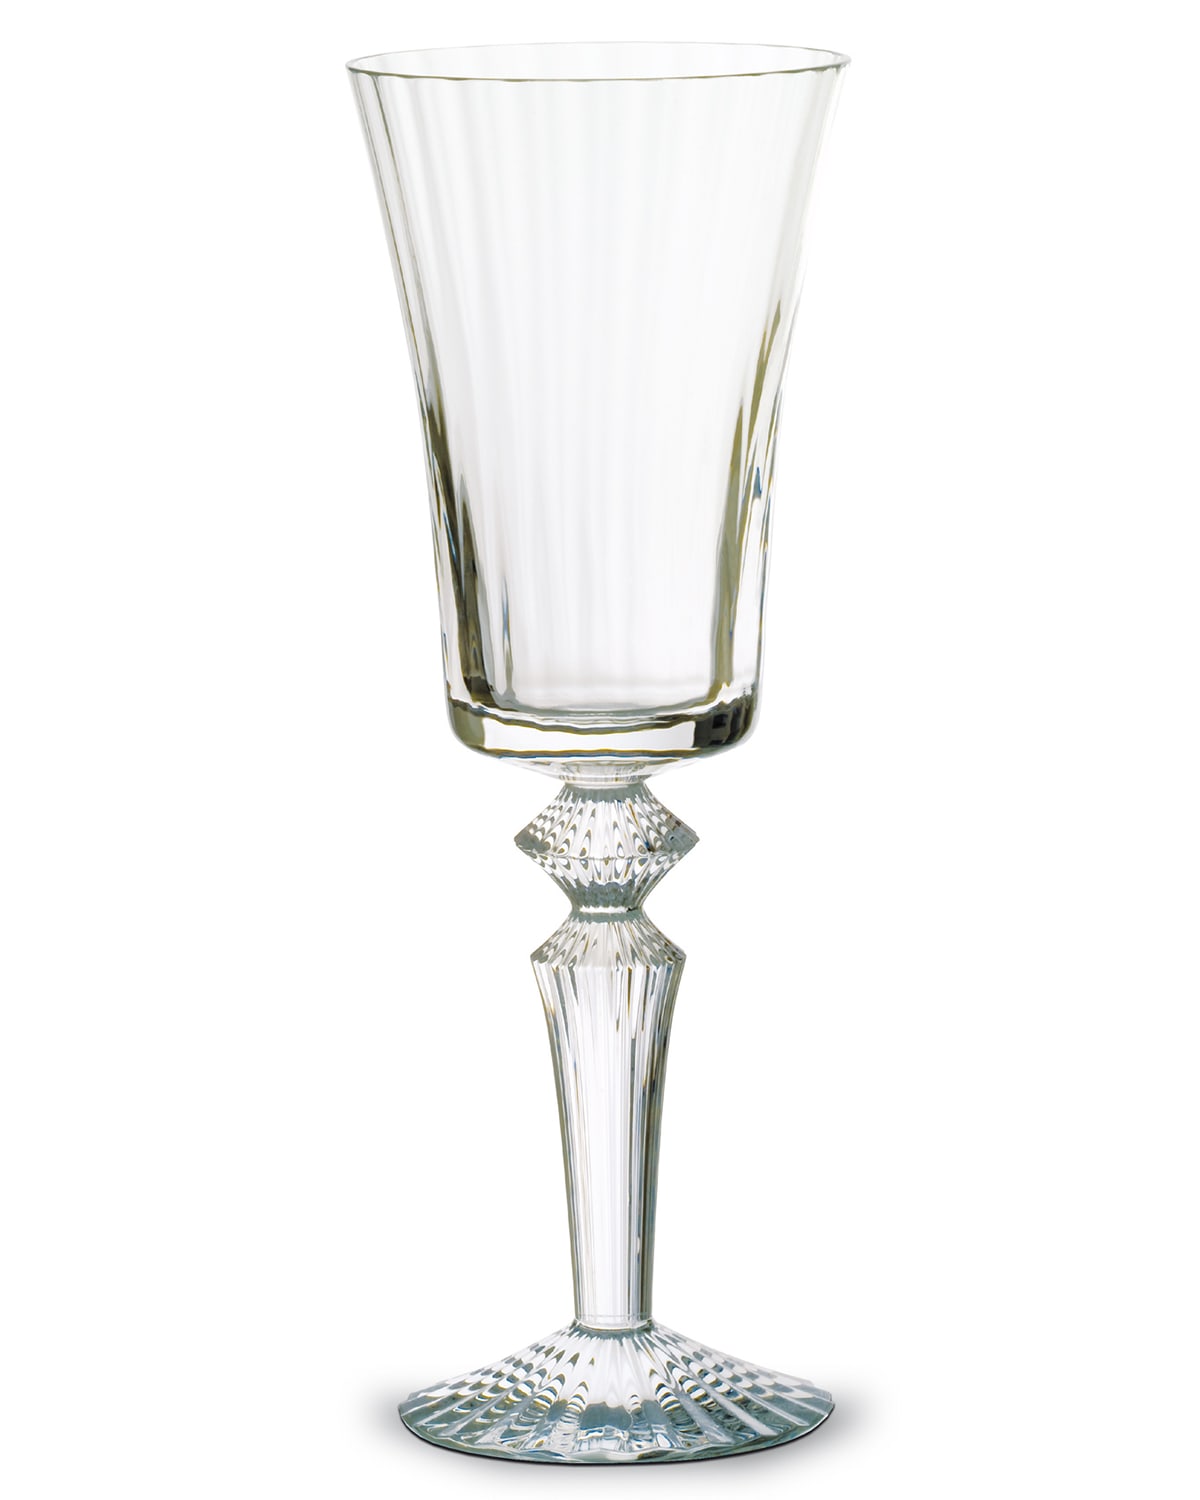 Mille Nuits Tall Goblet